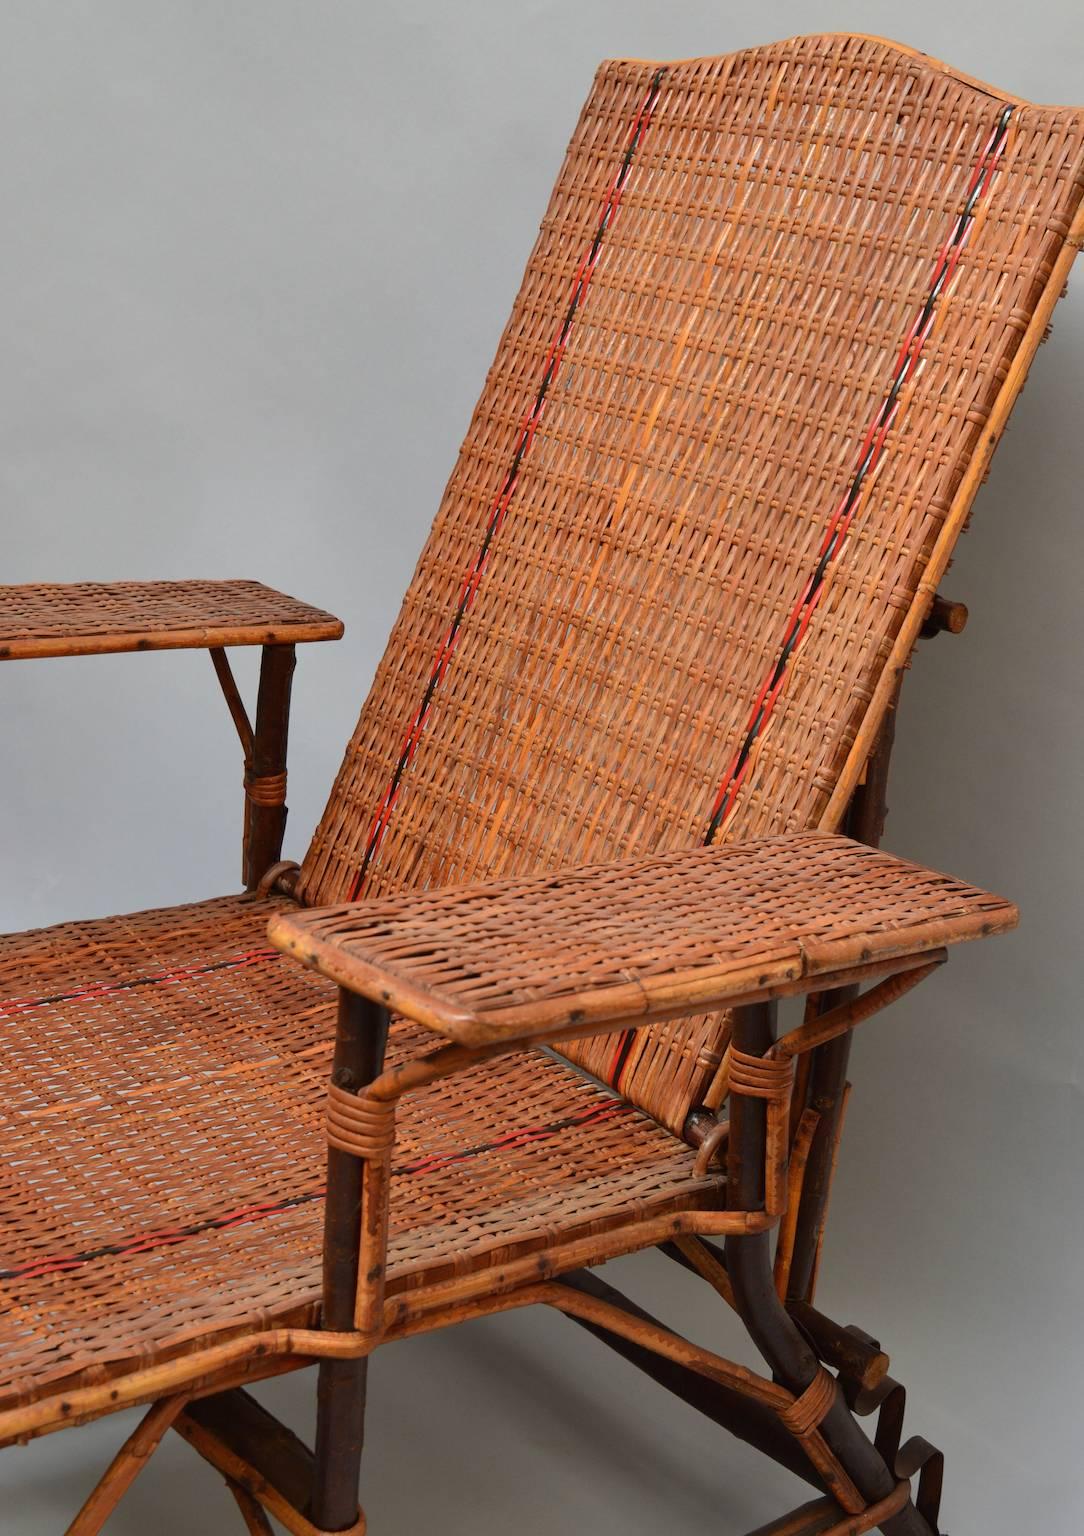 A vintage French woven rattan lounge chair with detachable footrest and adjustable back. The frame is made from twigs with smooth bark which lends special one of a kind character only found in a handmade piece.
Perfect to relax and read a book just